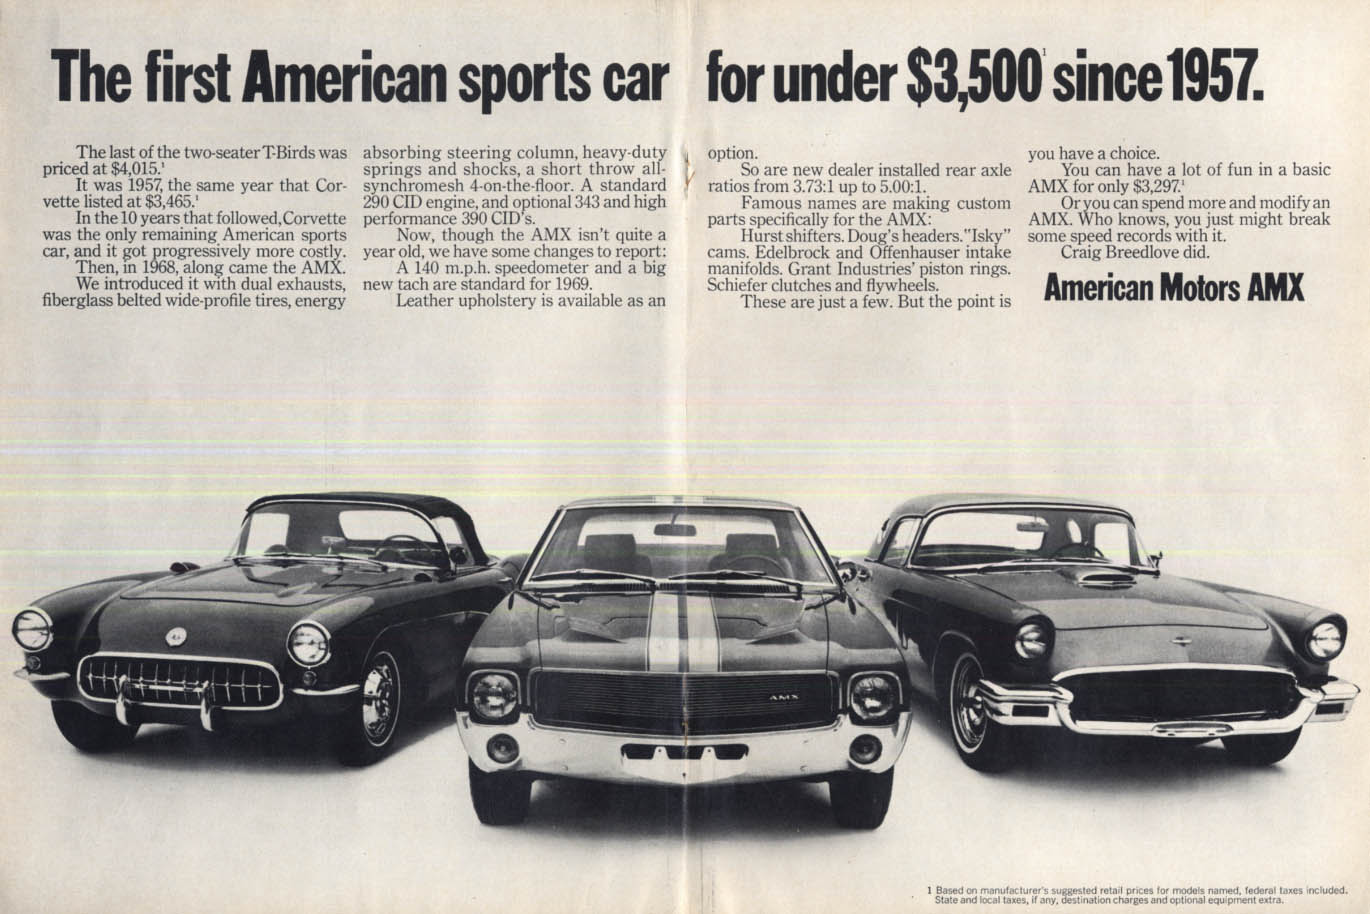 Image for 1st American sports car under $3500 since 1957 Corvette Thunderbird: AMX ad 1969